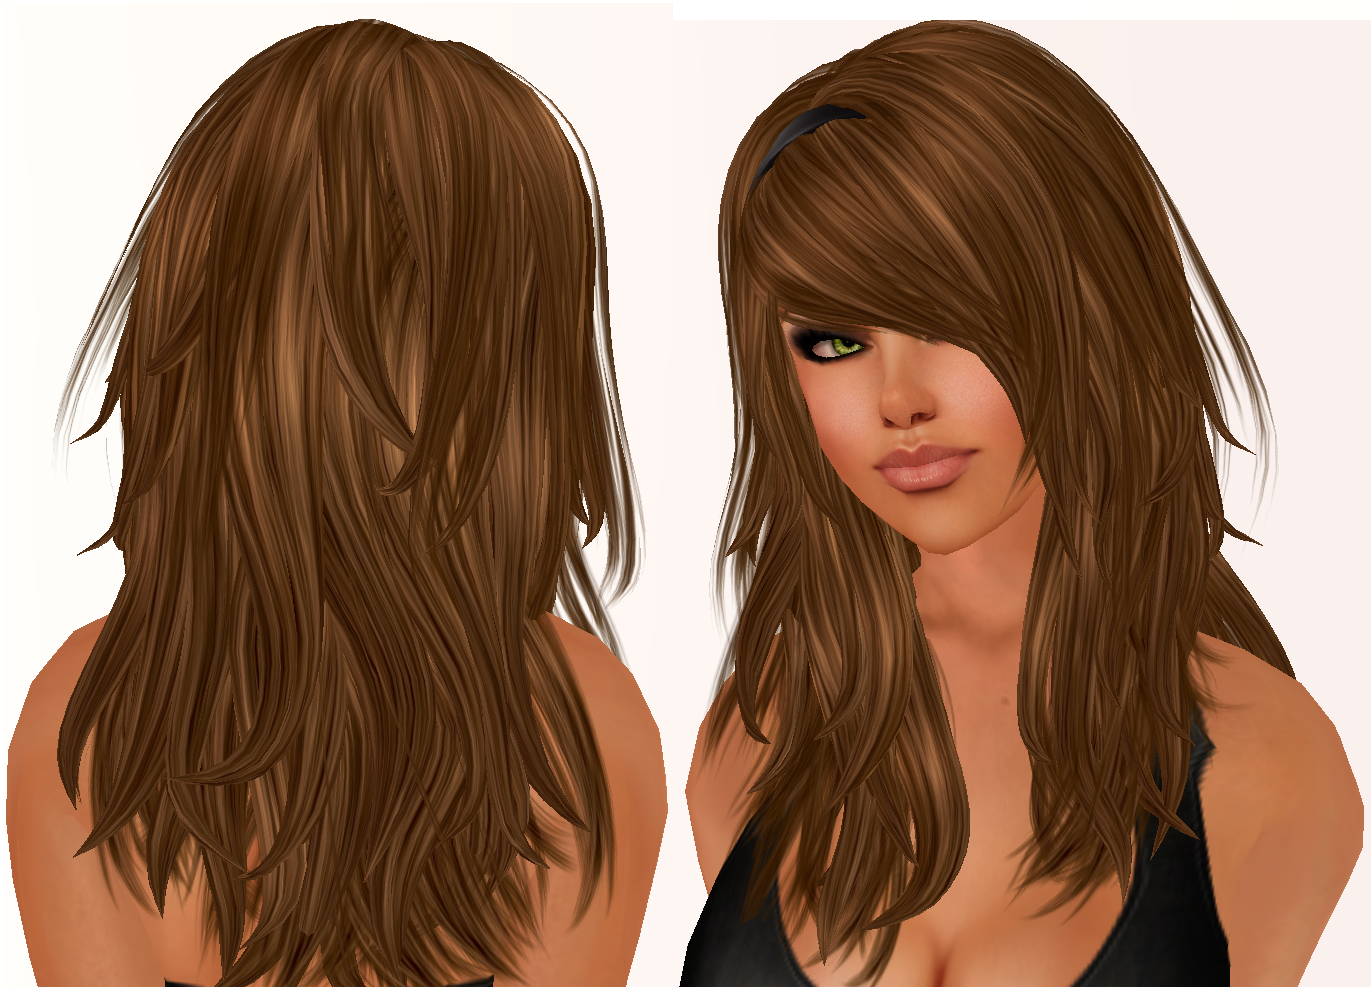 Hairstyles For Long Hair With Layers And Bangs